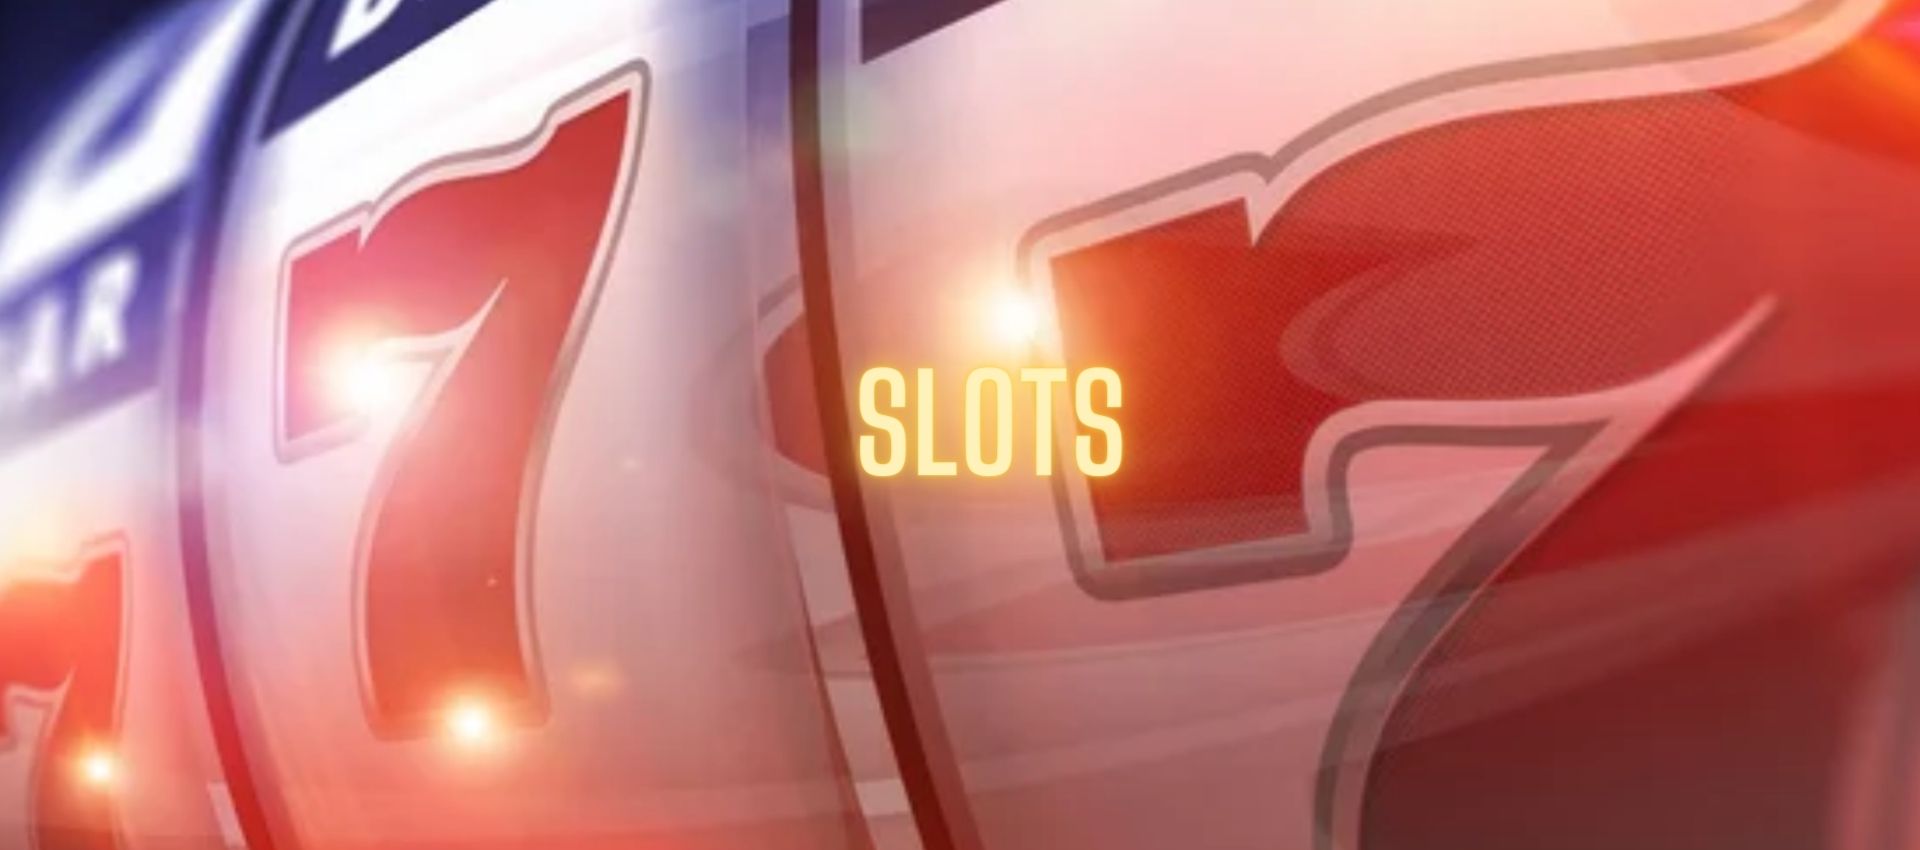 A detailed discussion about casino slots